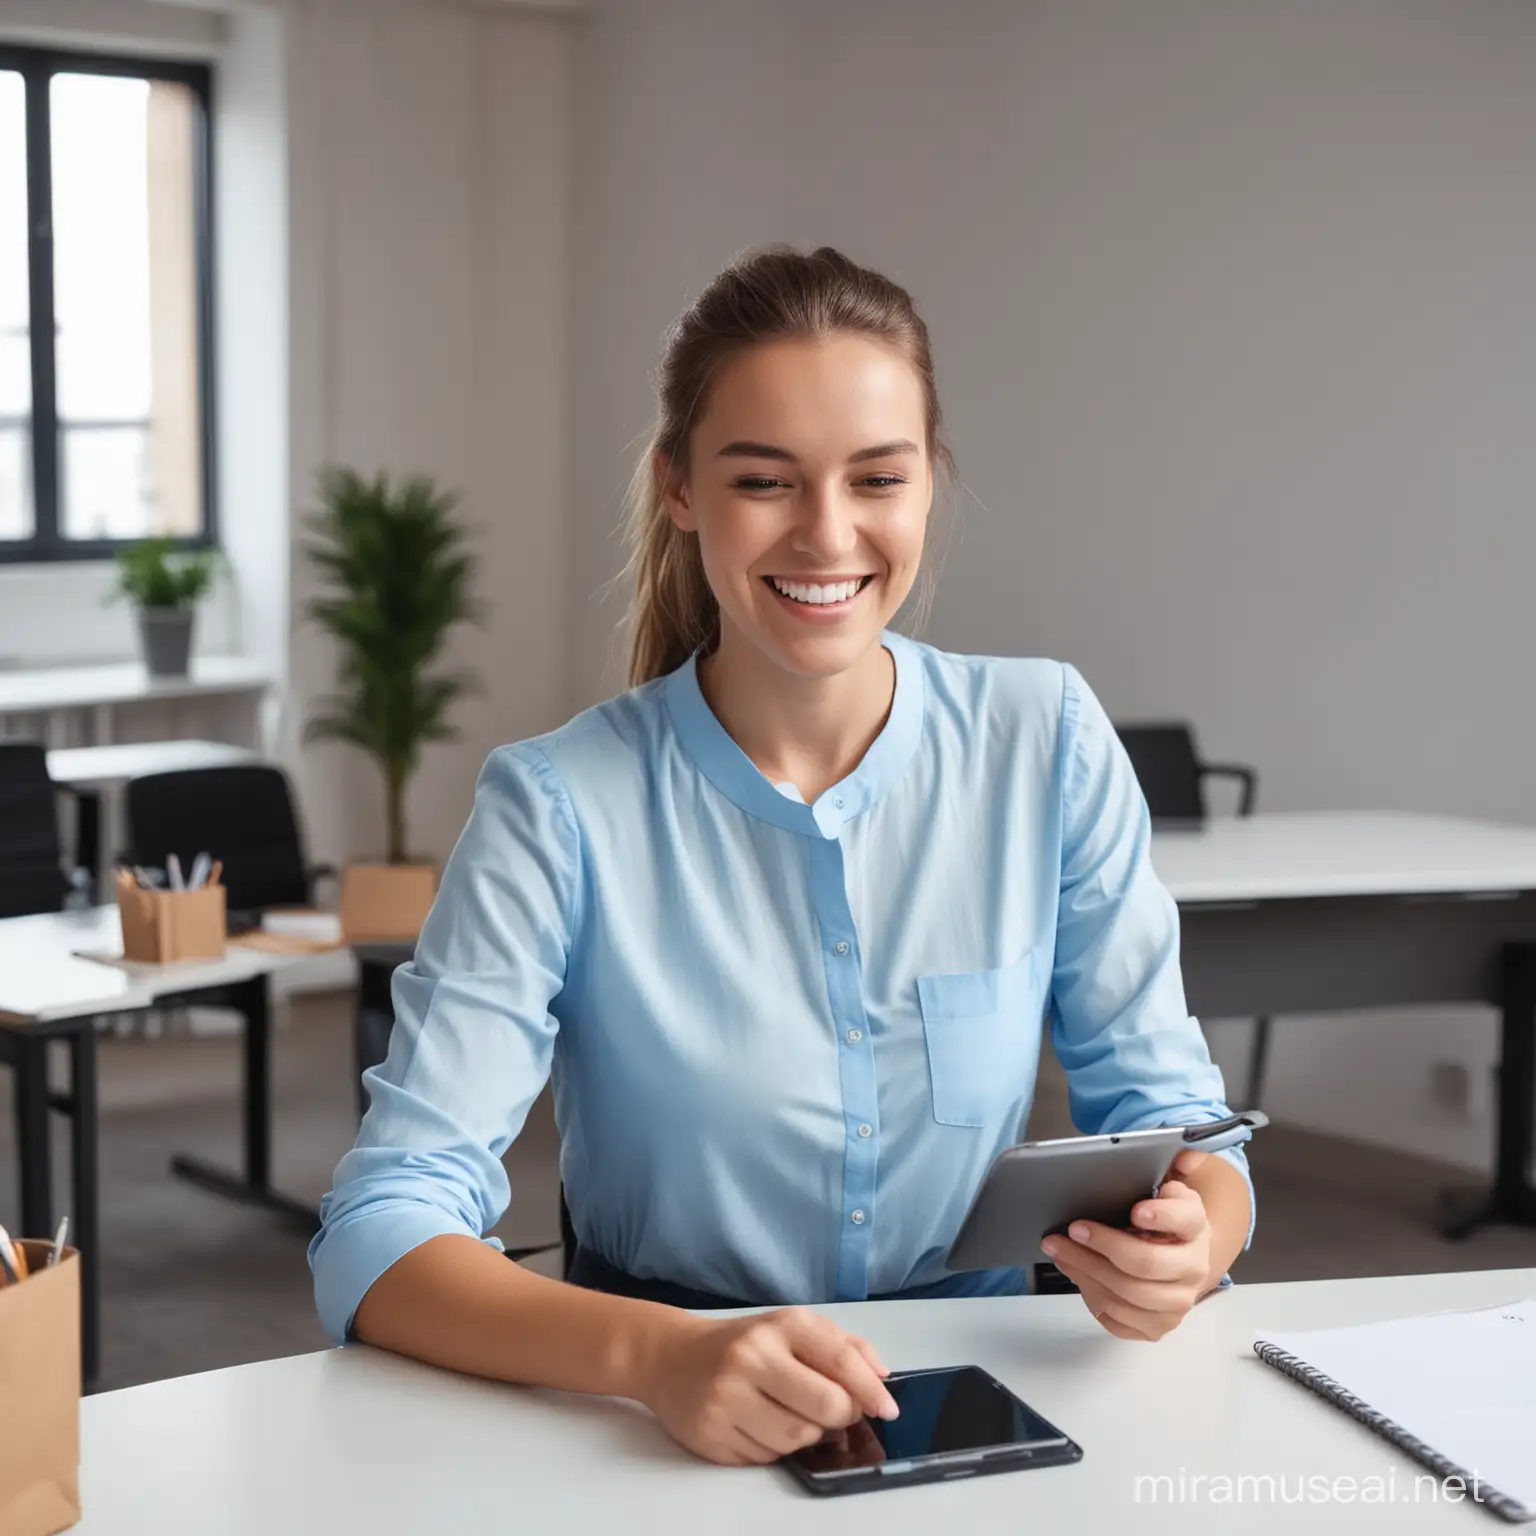 Joyful Young Woman in Blue Dress Using Tablet After Office Hours